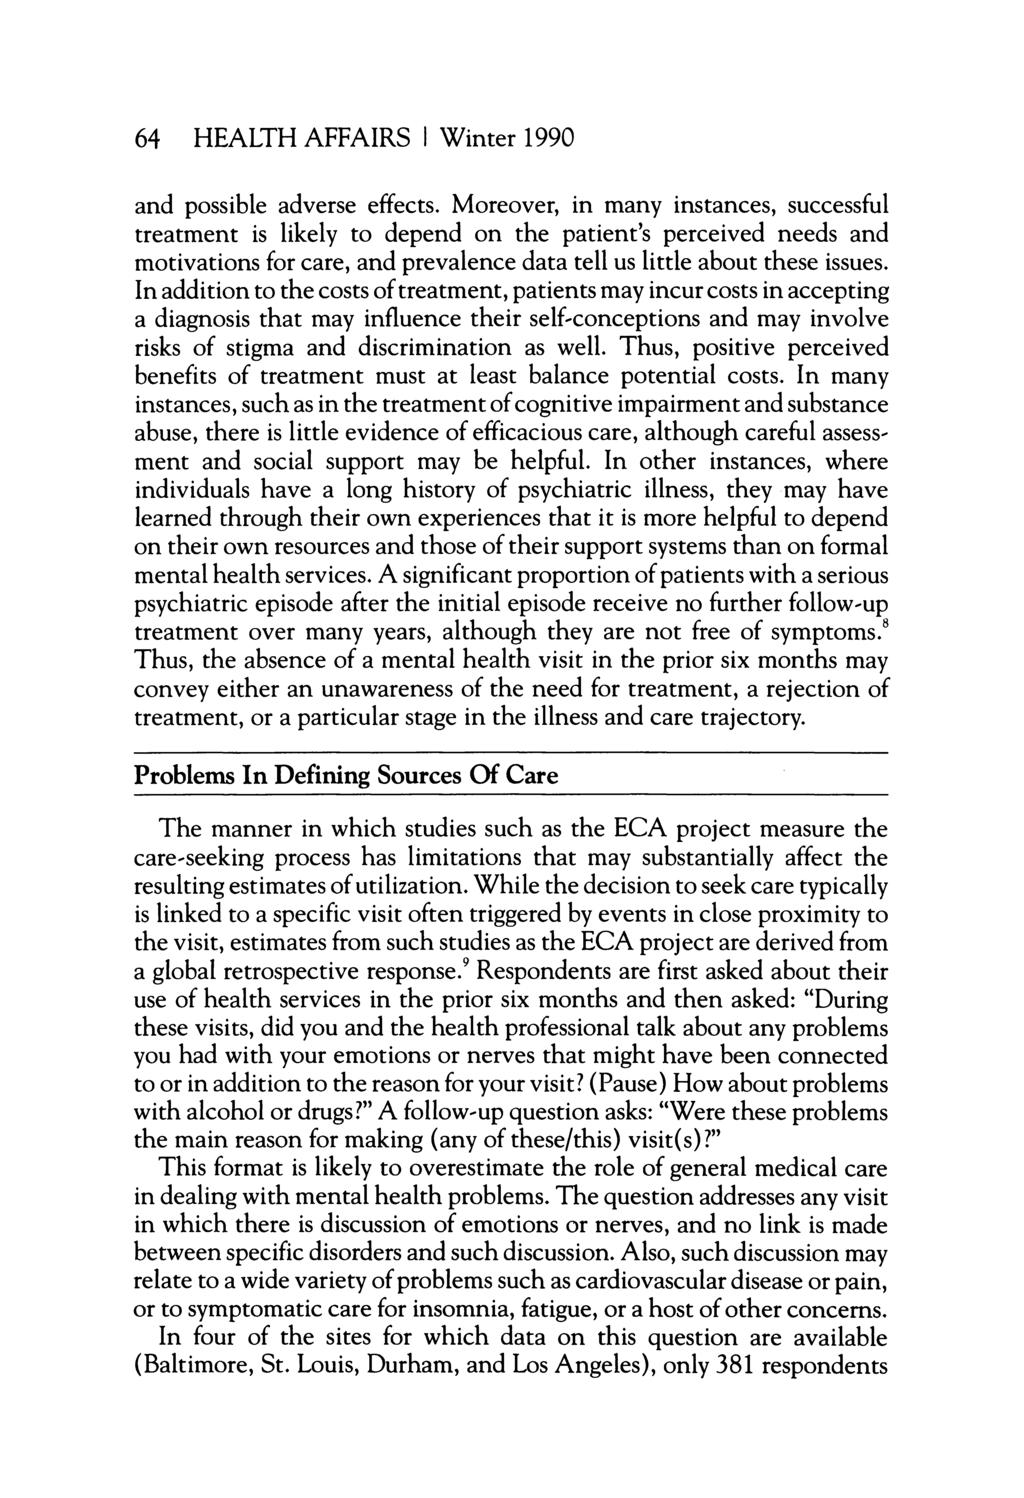 64 HEALTH AFFAIRS Winter 1990 and possible adverse effects.